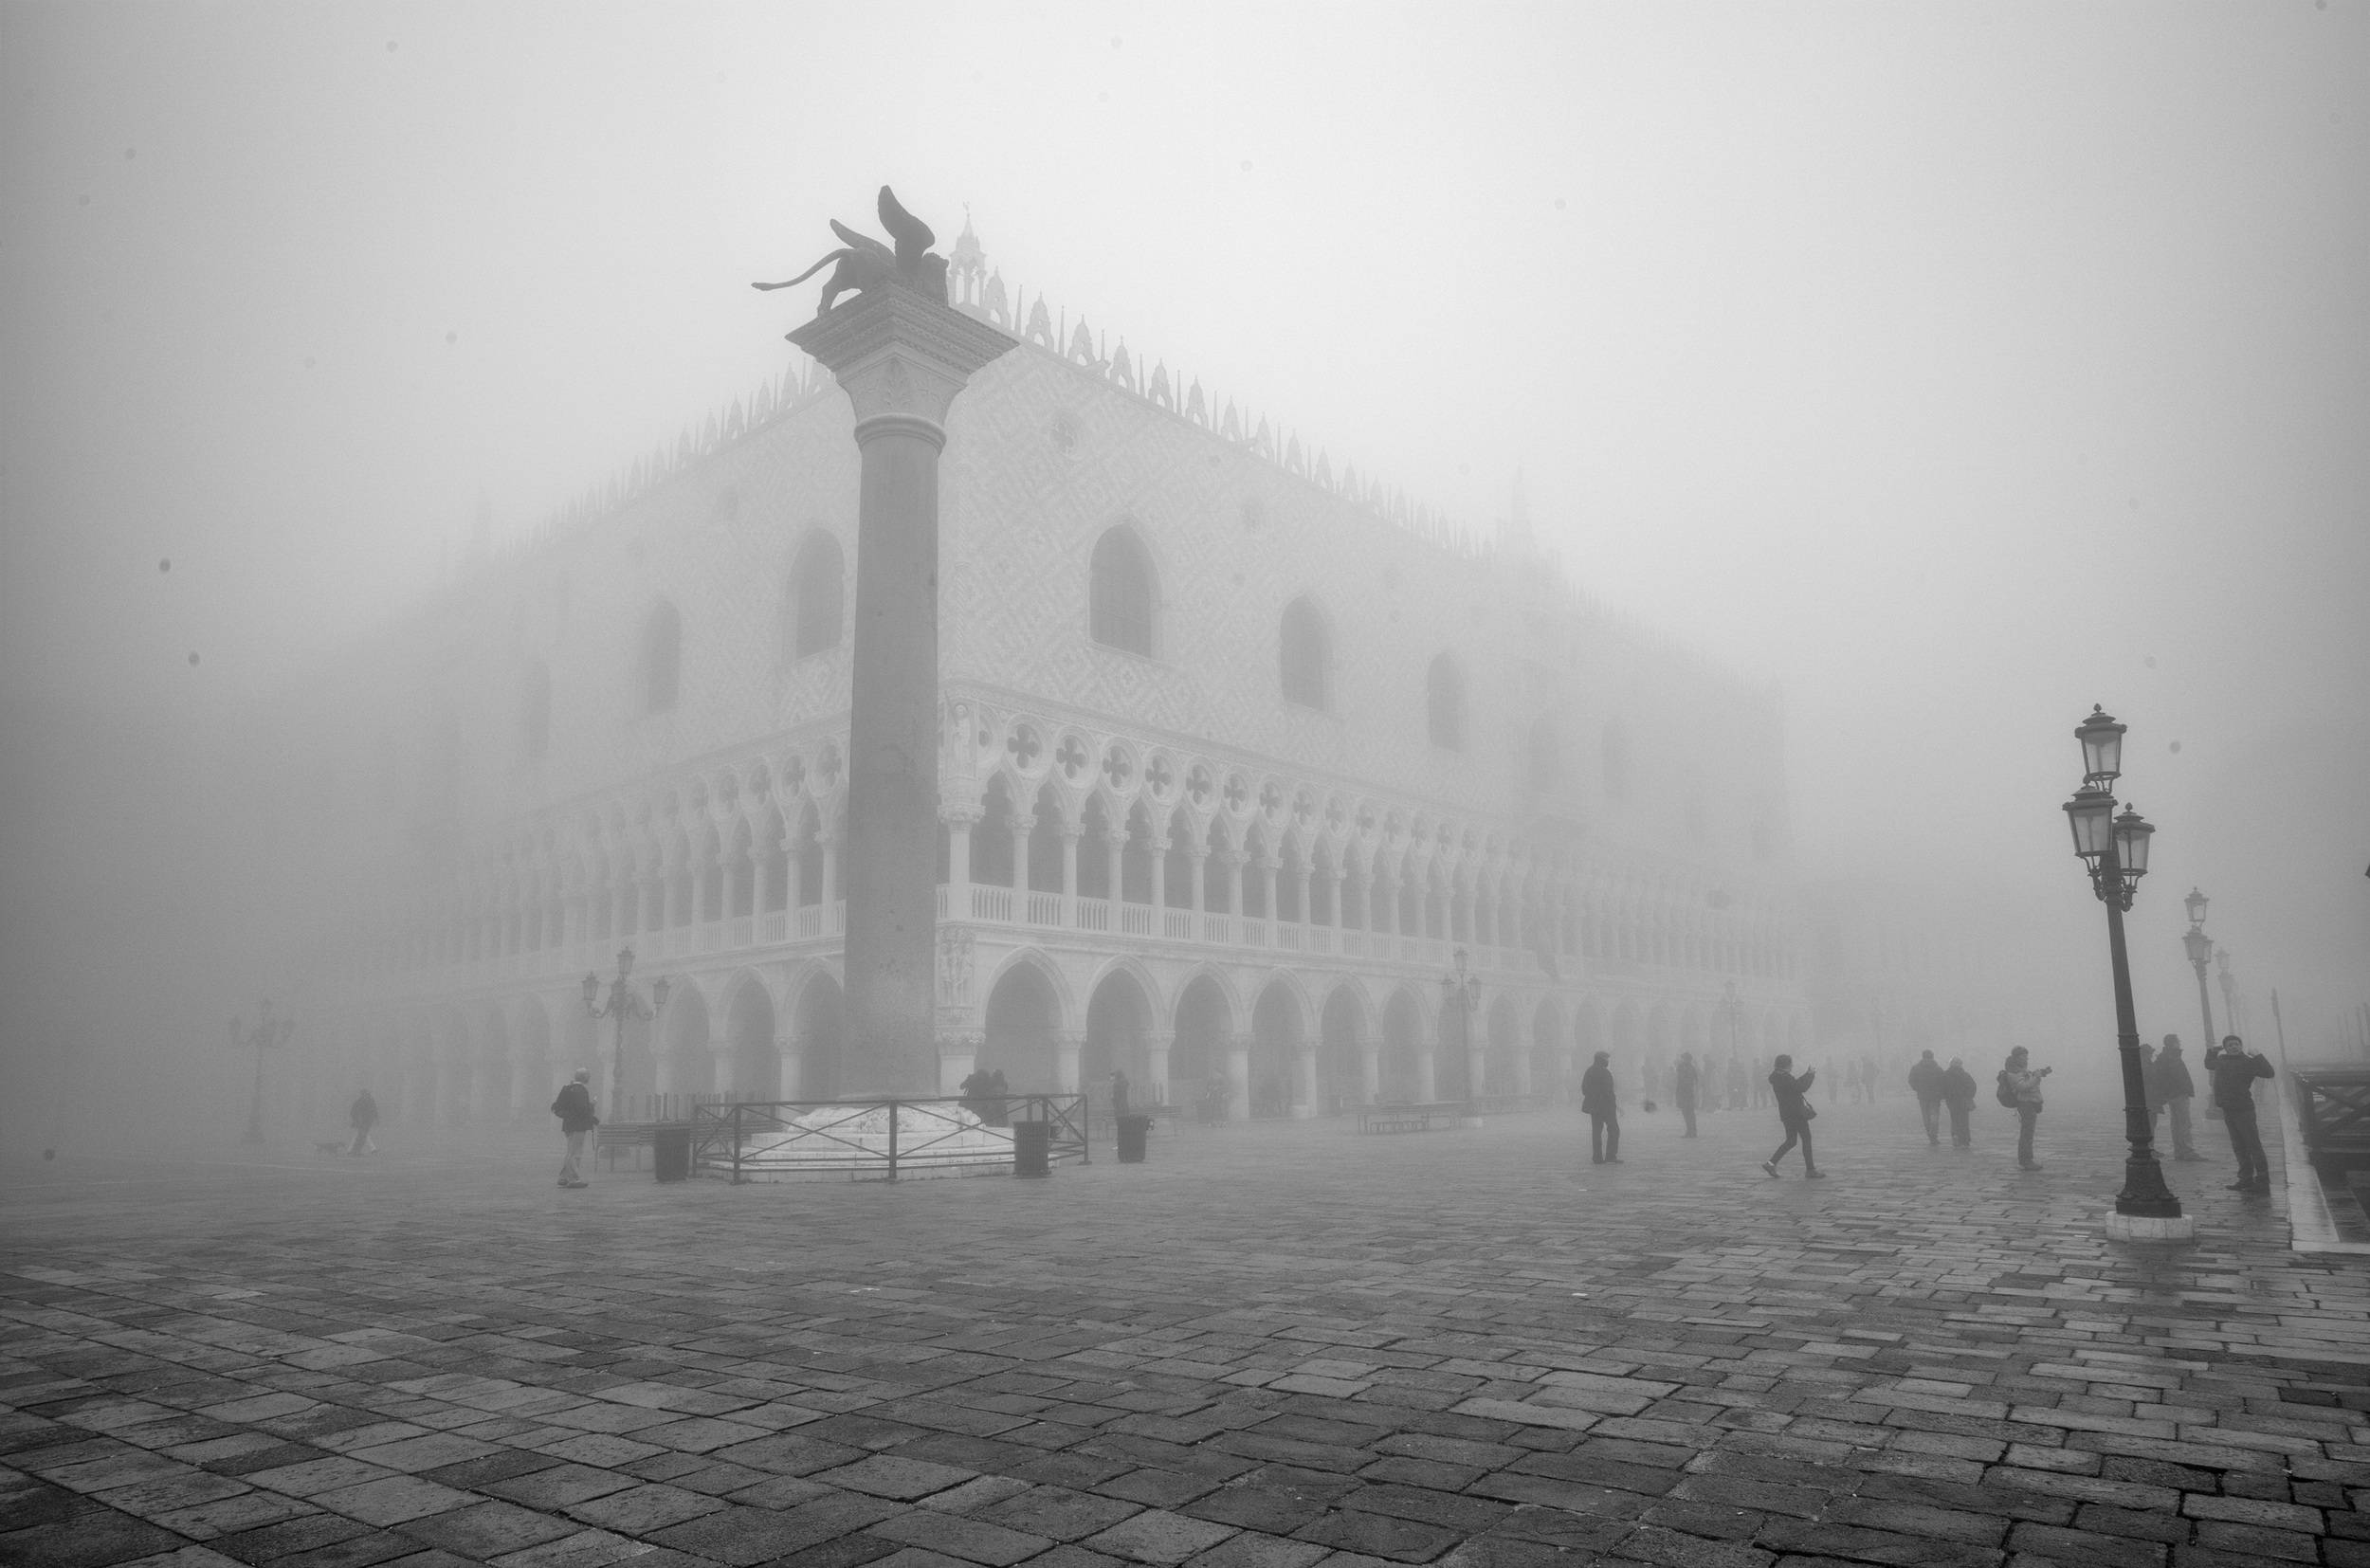  Venice Wakes Up Under Thick Fog 